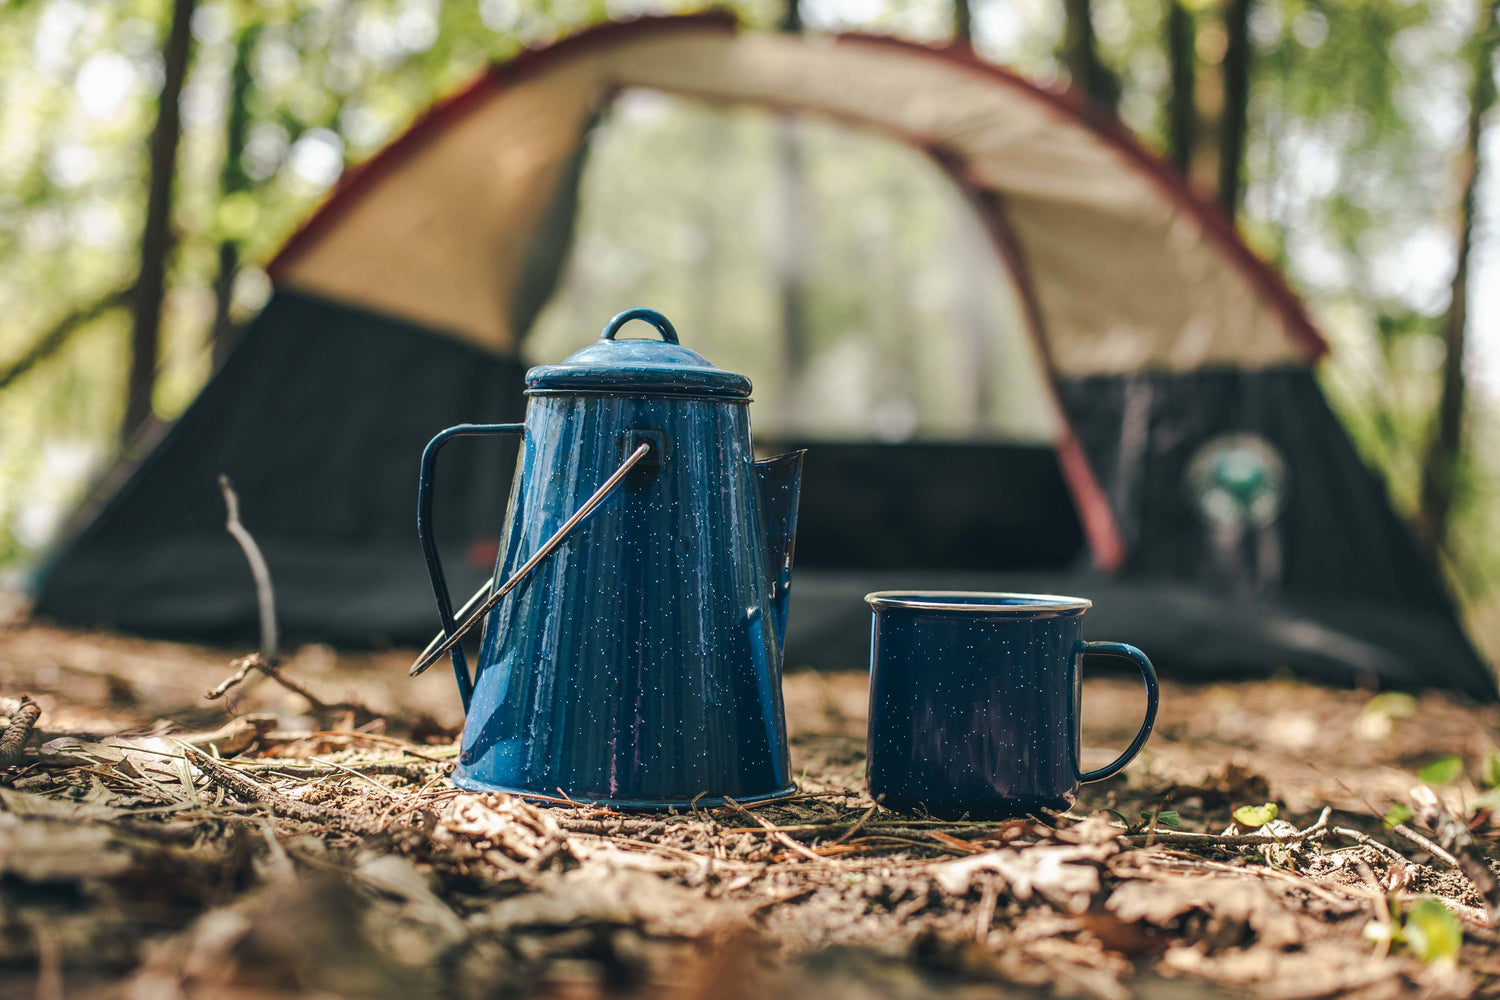 PapaBear Premium Coffee is the perfect pair for the outdoors! 